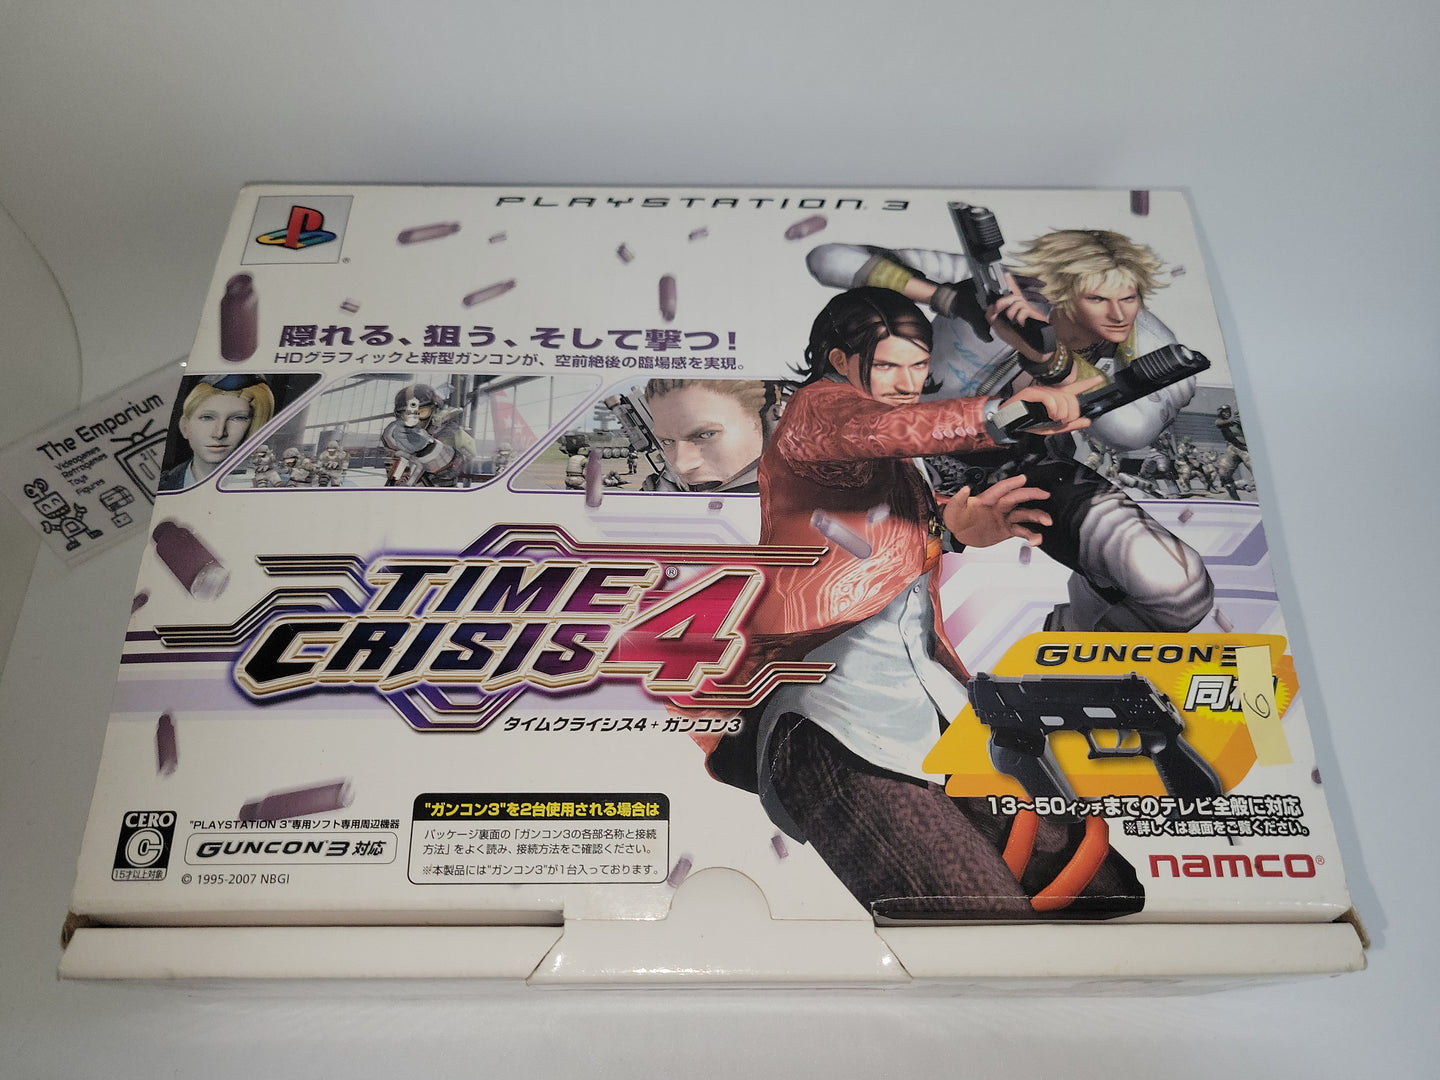 Time Crisis 4 with Guncon 3 Set - Sony PS3 Playstation 3